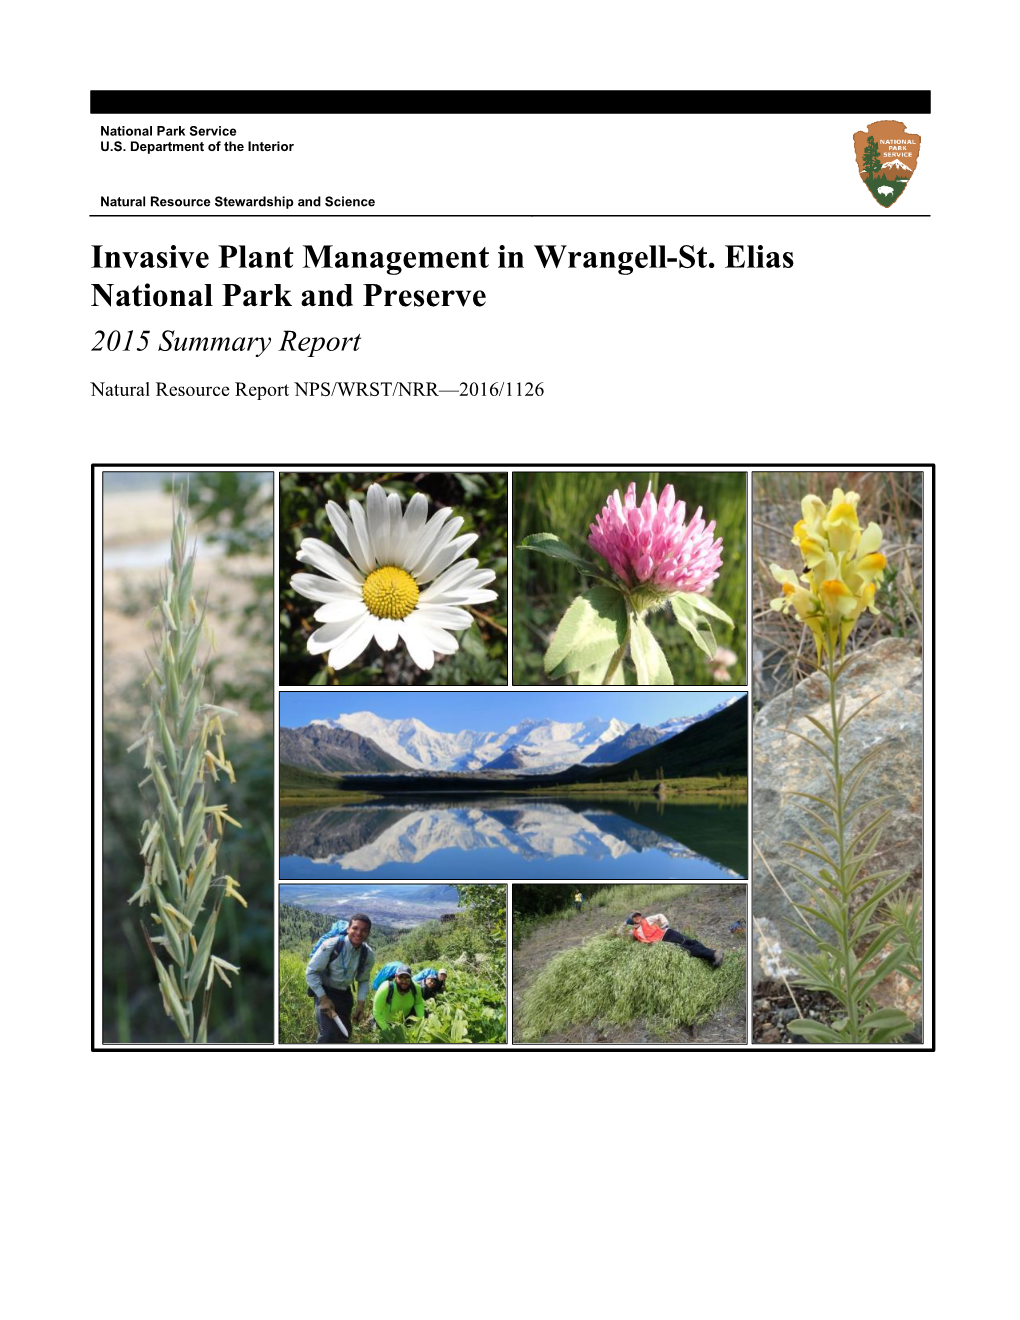 Invasive Plant Management in Wrangell-St. Elias National Park and Preserve 2015 Summary Report